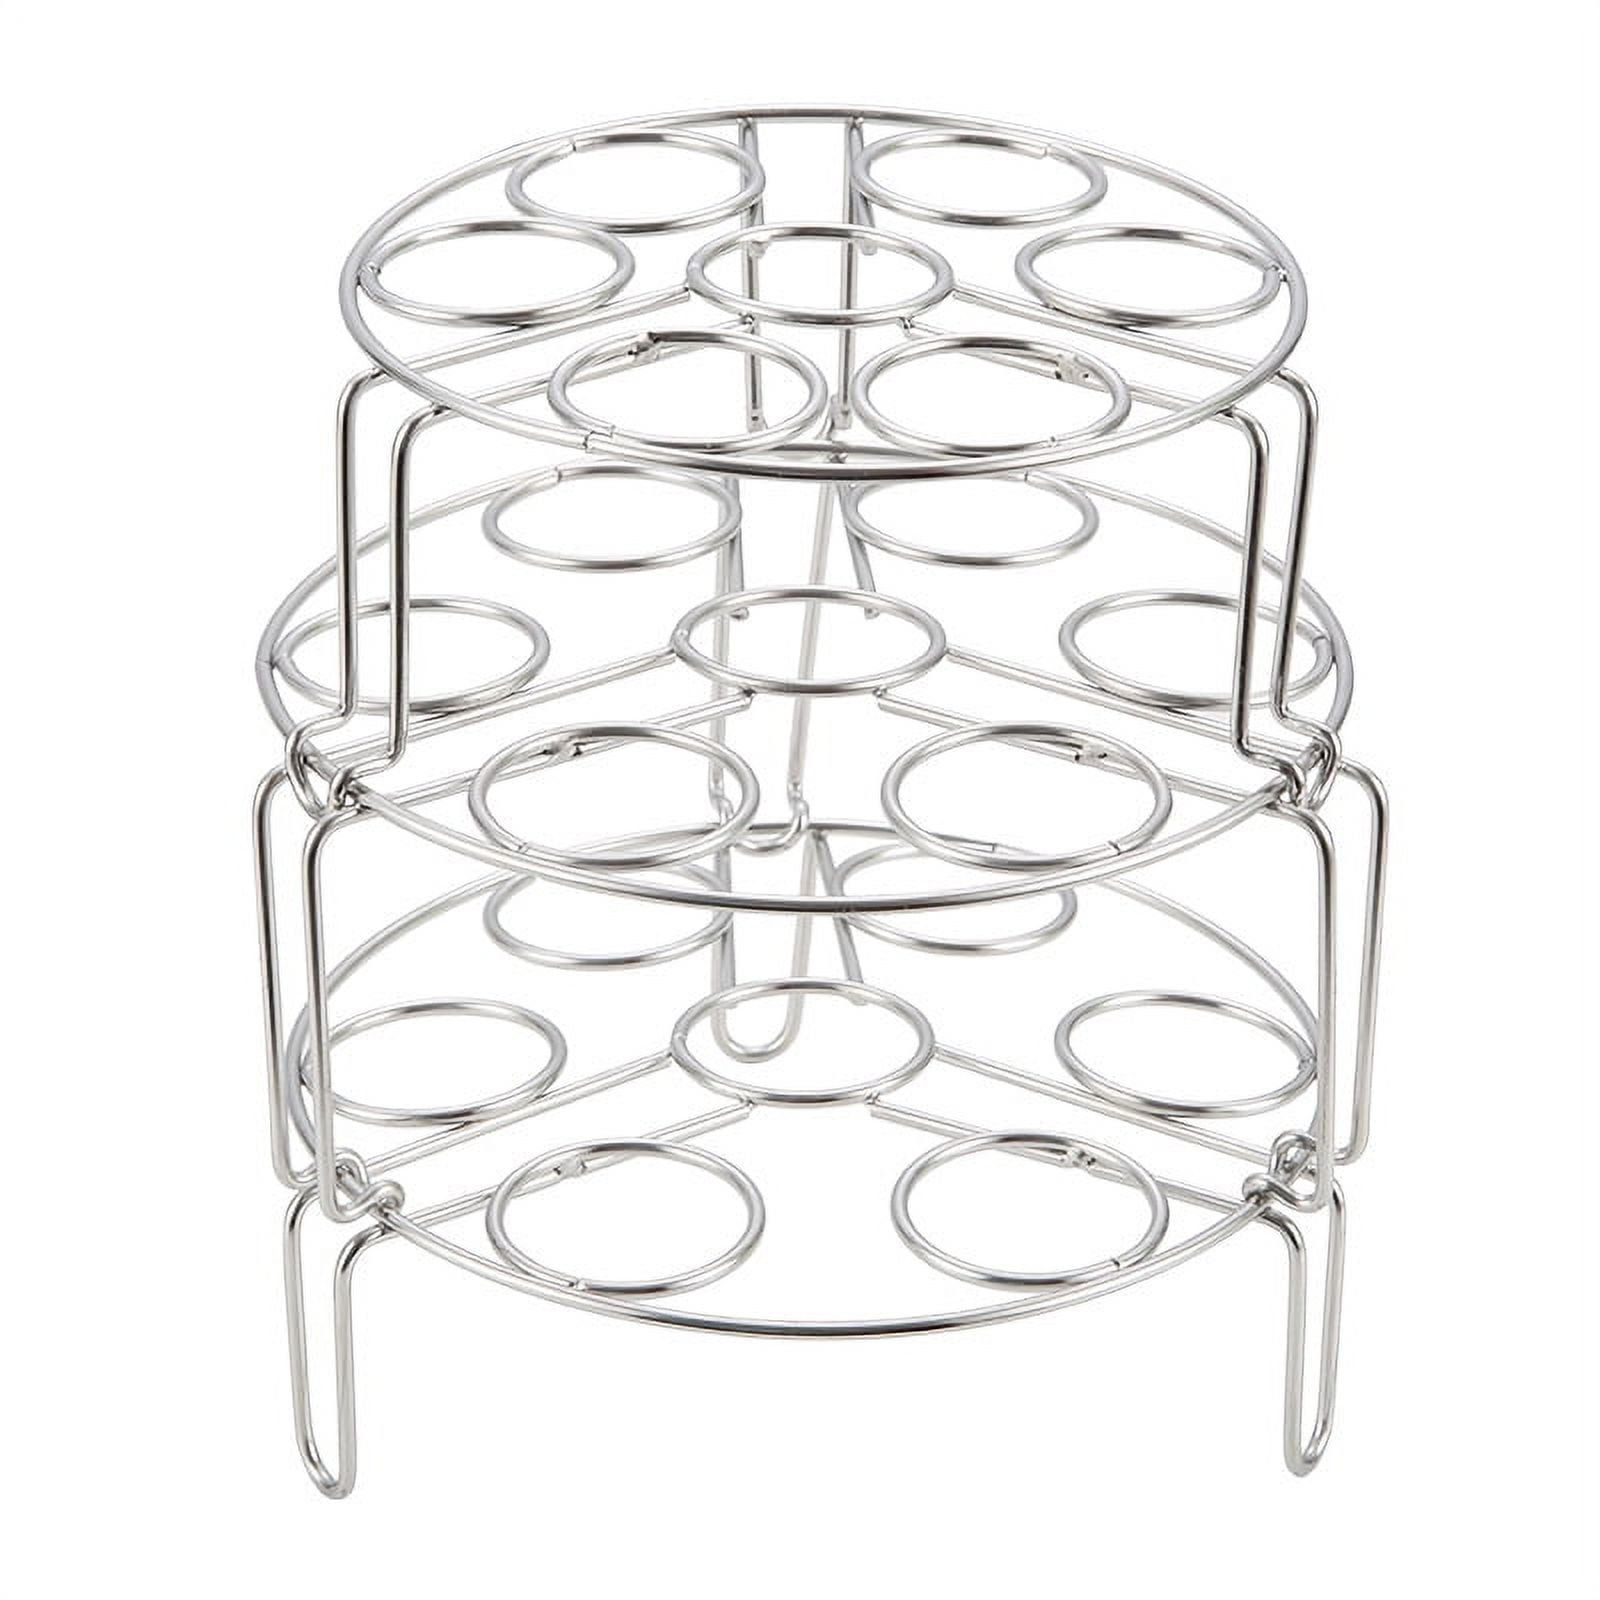 1pc Round Cooling Racks For Cooking Baking Canning Lifting Food In Pots  Pressure Cooker Steamer And Oven Stainless Steel Steamer Rack Circle Wire  Cake Cooling Rack Kitchen Accessories | Shop The Latest